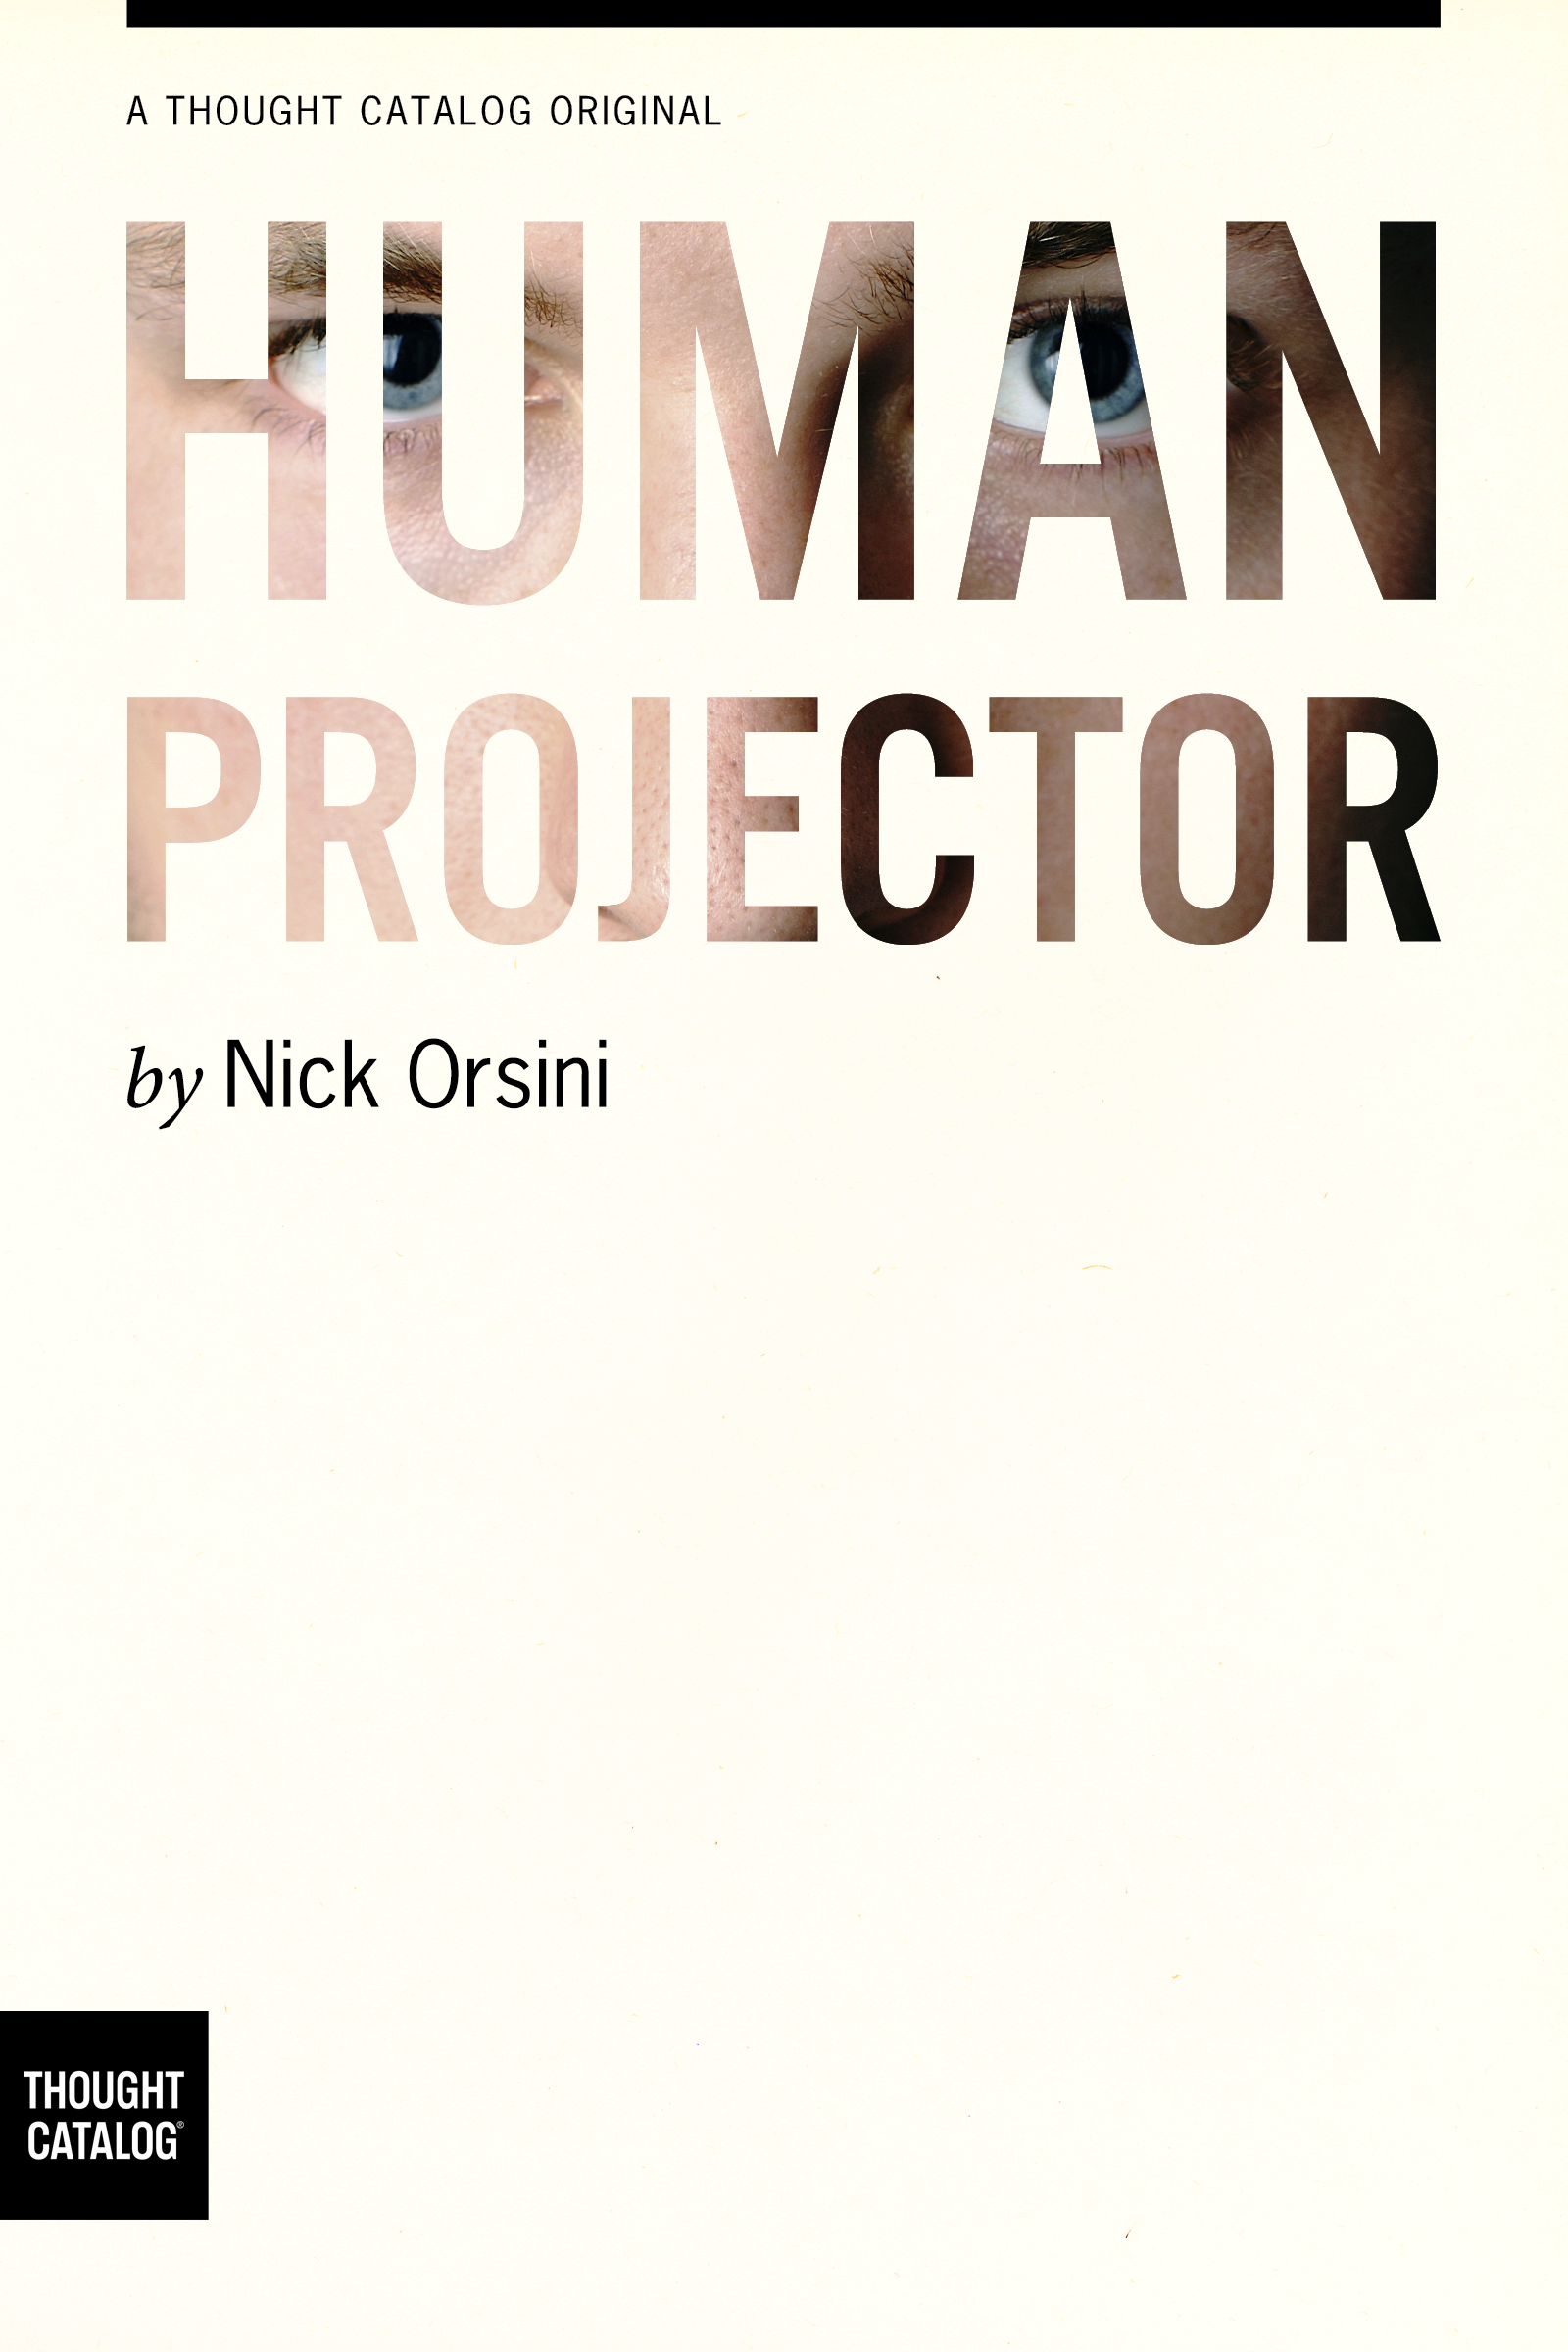 Buy Nick's poetry book, "The Human Projector," here.